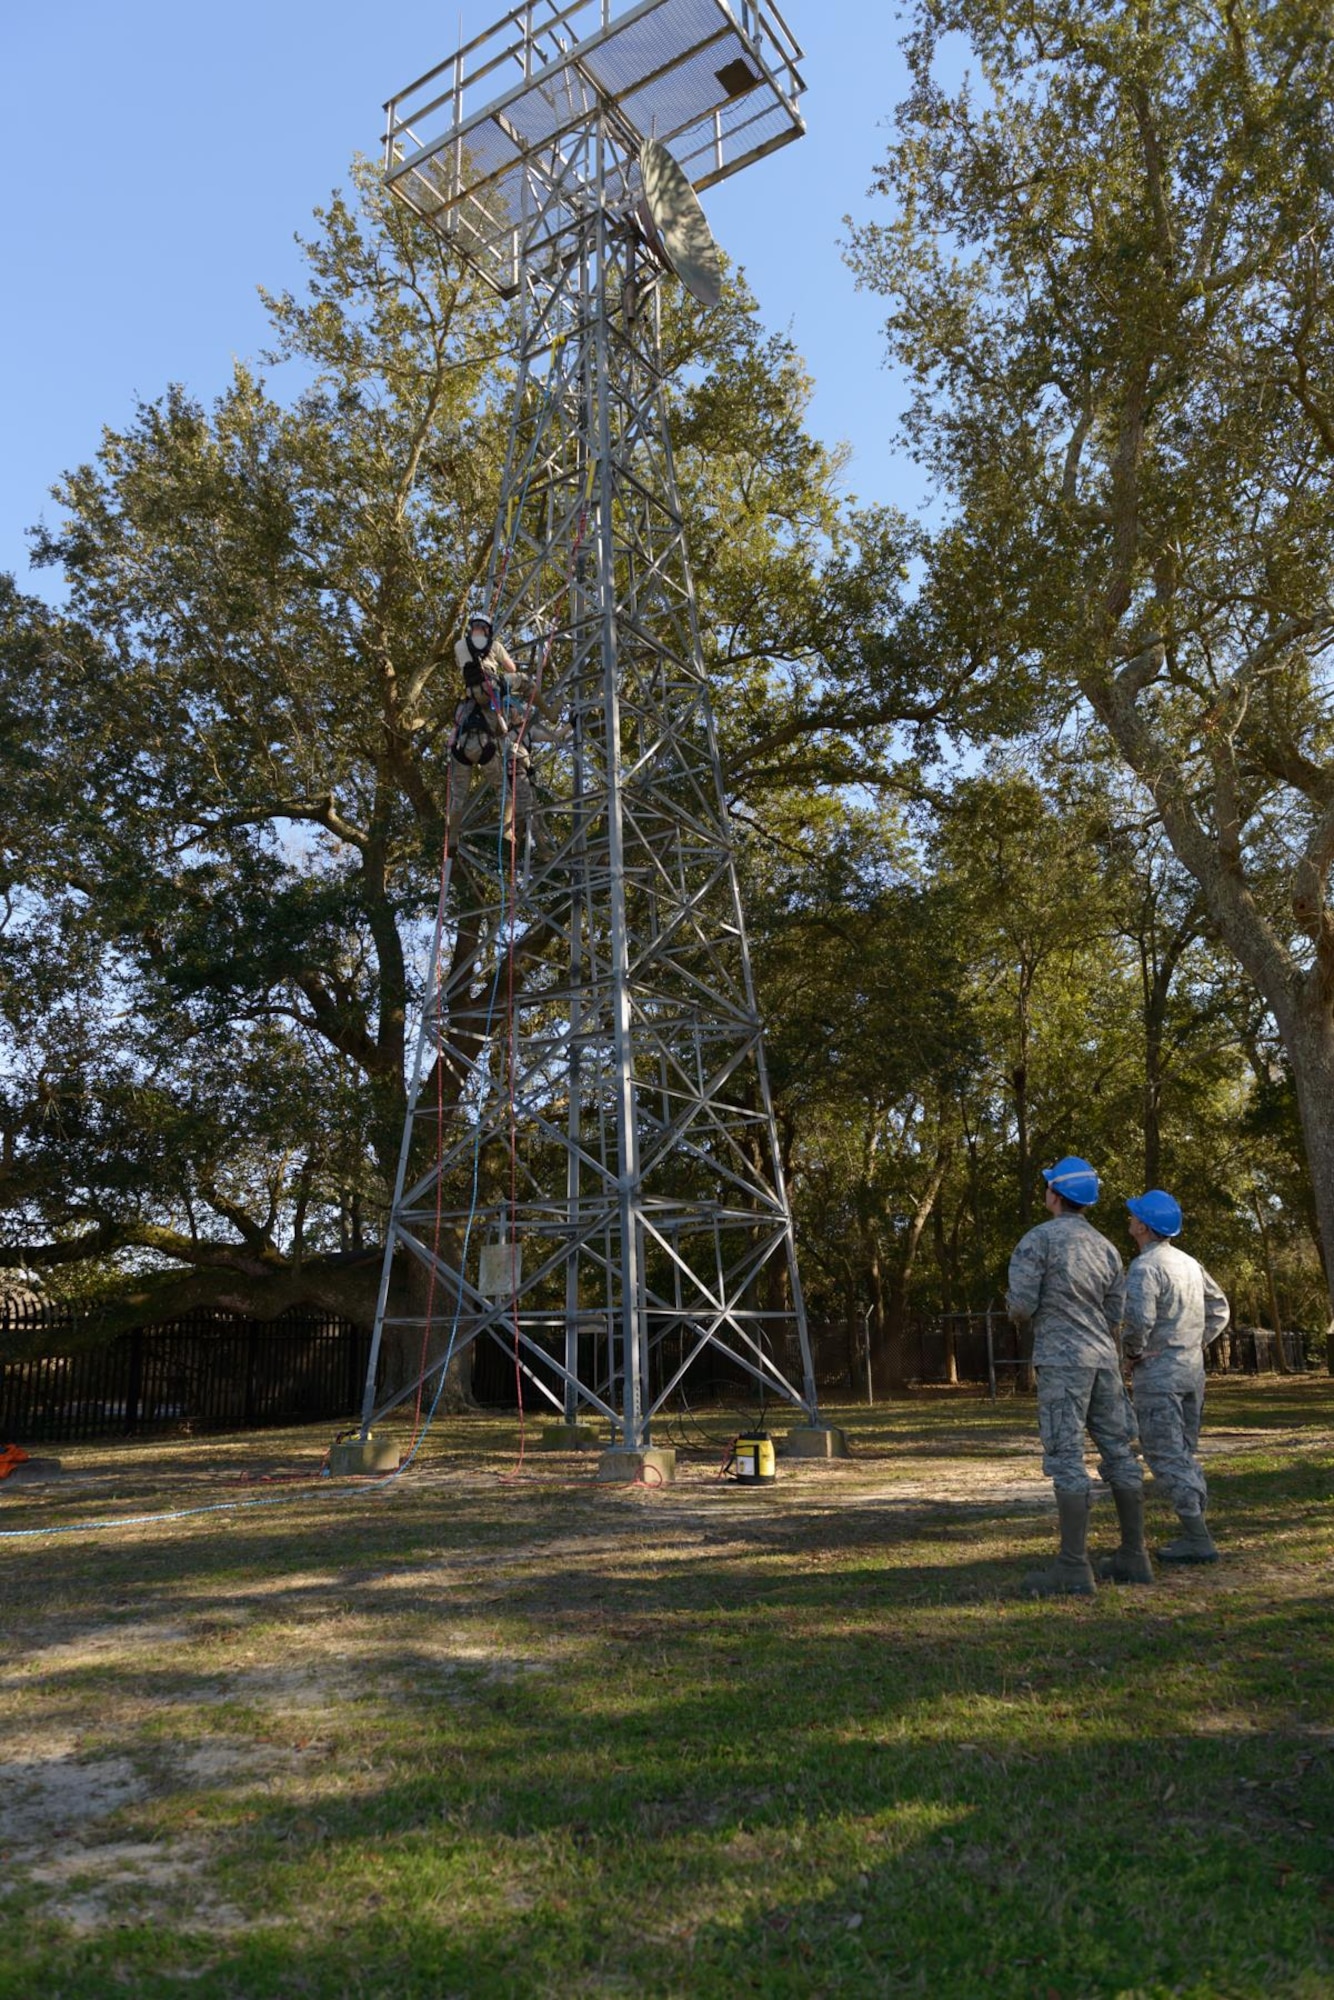 Maj. Gen. Robert LaBrutta, 2nd Air Force commander, and Senior Airman Chase Kiefer, 85th Engineering Installation Squadron cable and antenna systems technician, discuss tower rescue procedures during a 2nd AF immersion tour of the unit located at Keesler Air Force Base, Miss., Feb. 9, 2017. The Airmen at the 85th EIS are part of the only active duty EIS in the Air Force. They are also the only organization in the Defense Department providing specialized engineering services such as electromagnetic hazard and interference investigations and High Altitude Electromagnetic Pulse protection. (U.S. Air Force photo by Andre’ Askew)